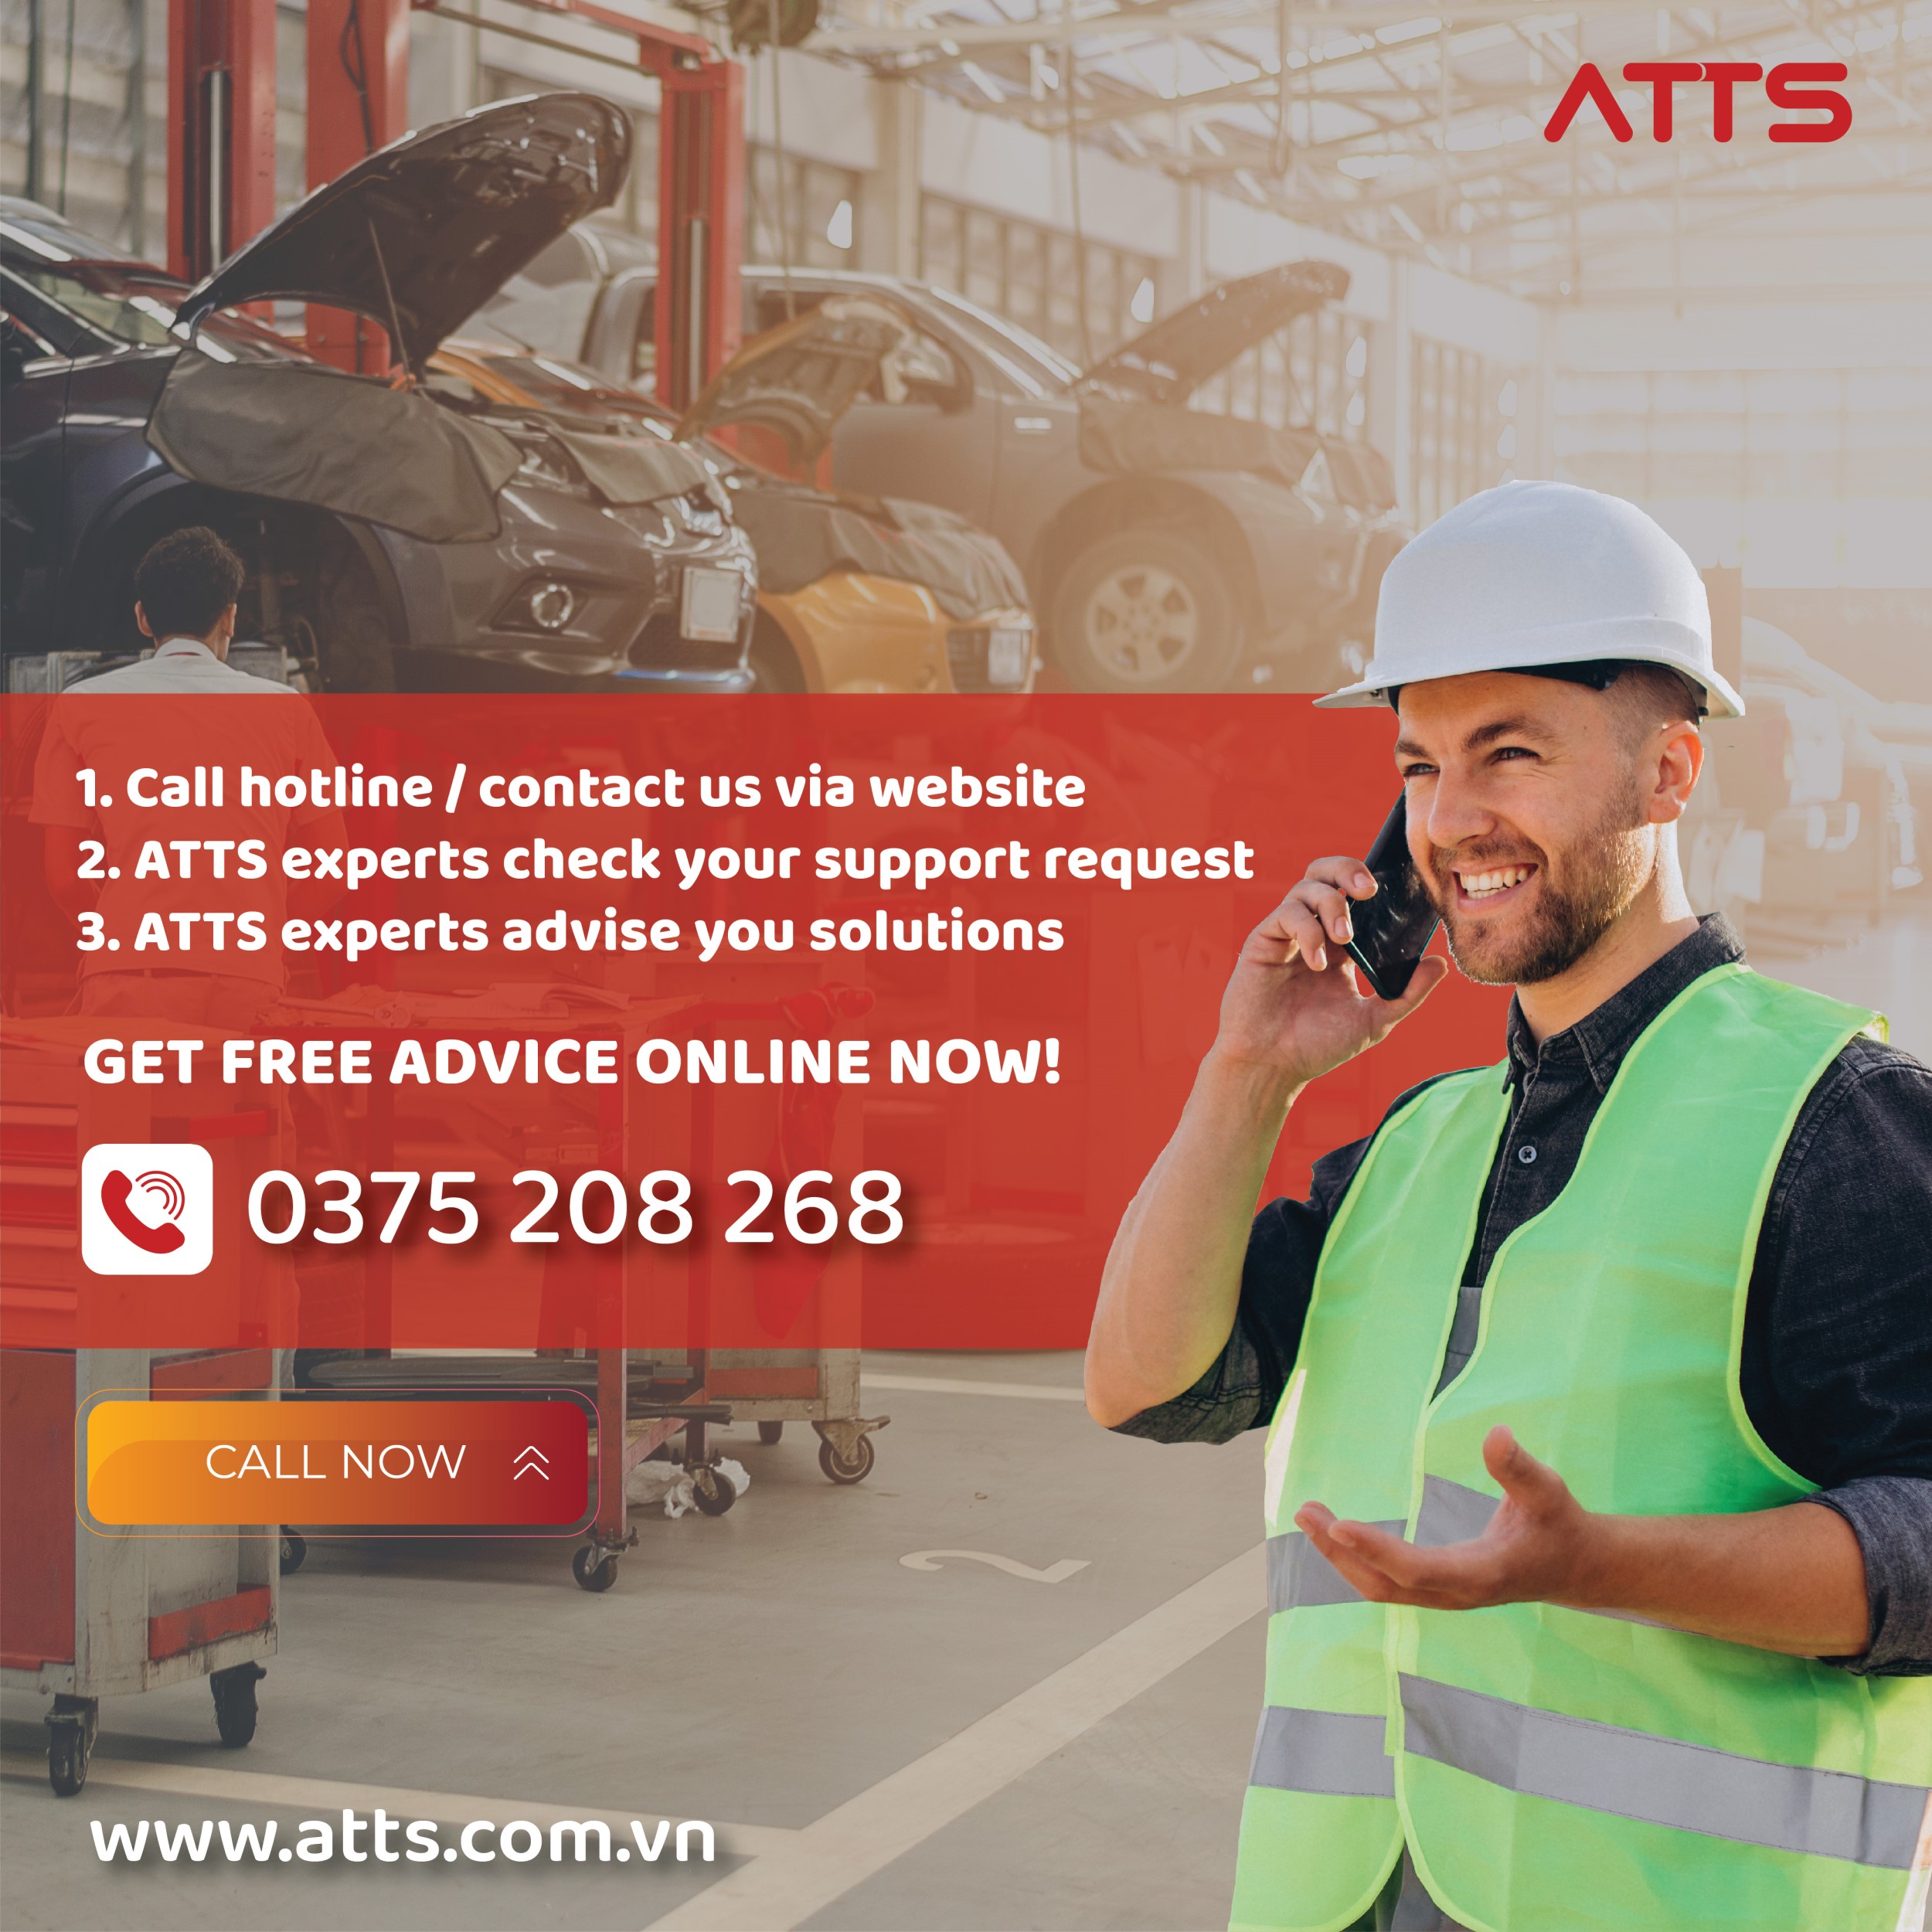 Call hotline 0375 208 268 to get FREE automation advice from ATTS experts